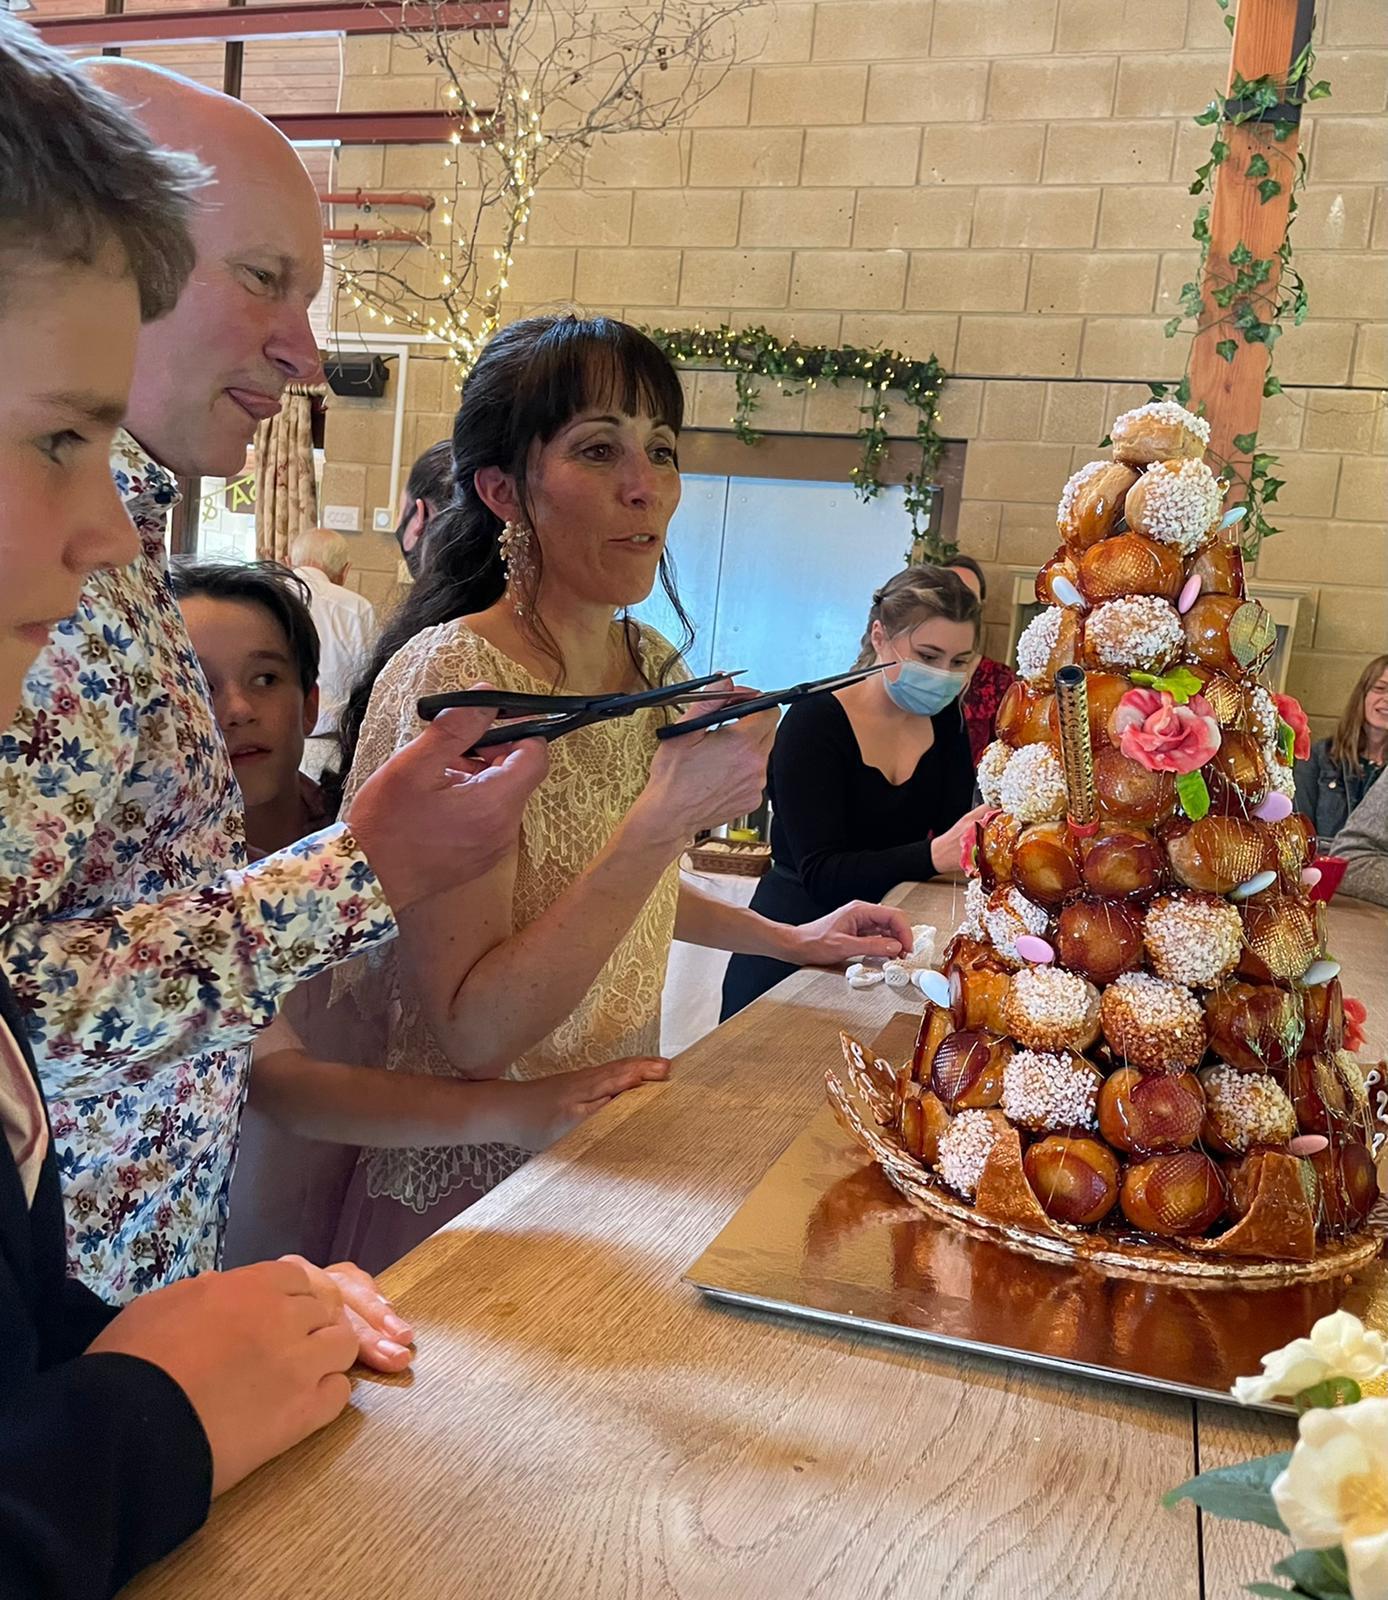 The couple cut the traditional French wedding cake, known as a Croquembouche